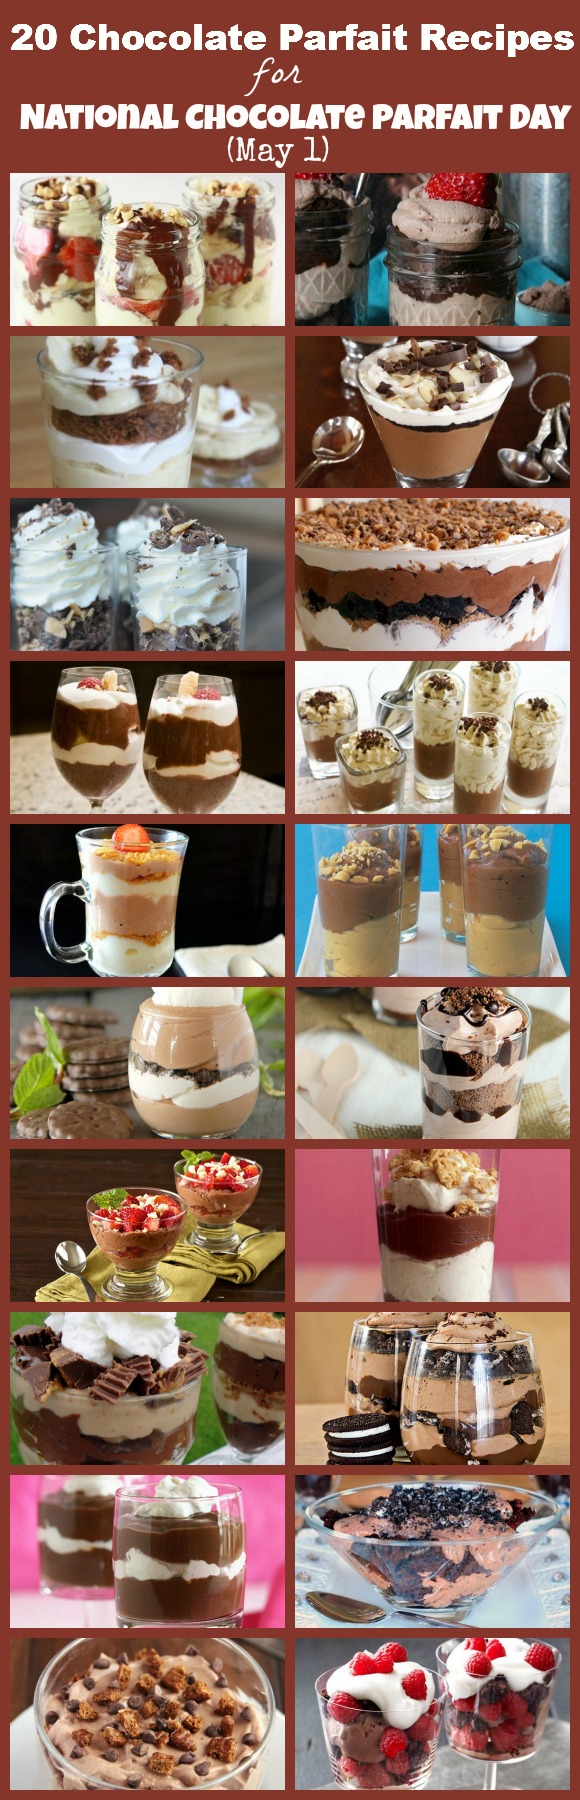 20 Delicious Chocolate Parfait Recipes for National Chocolate Parfait Day (May 1)